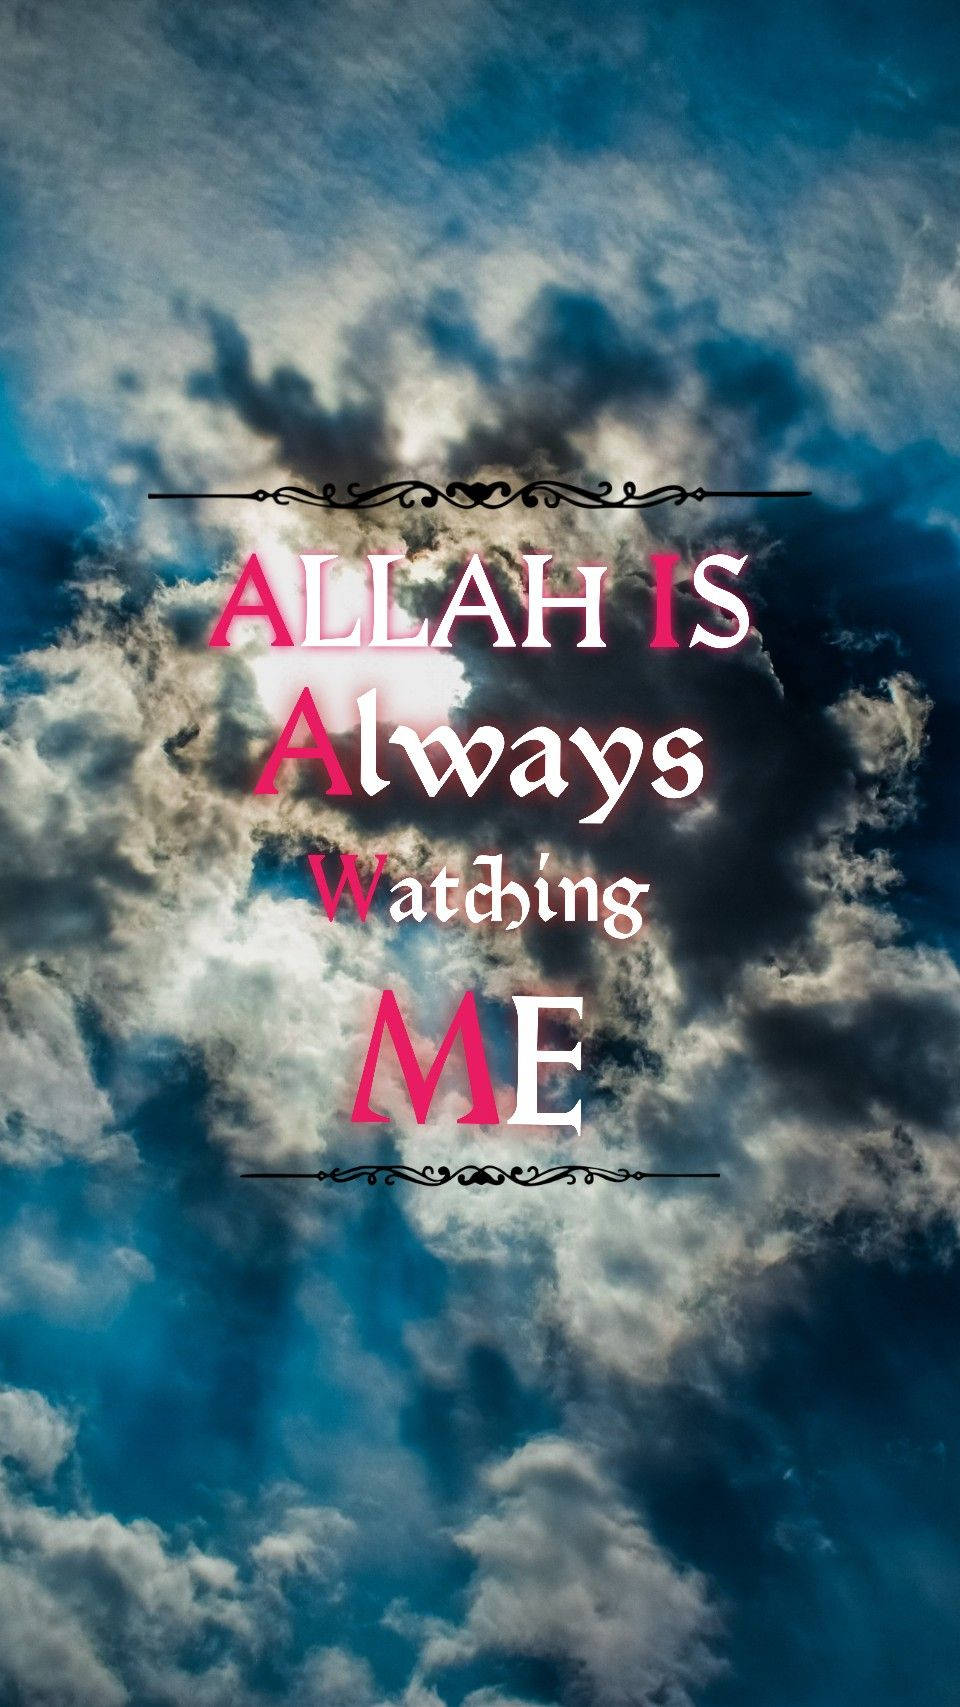 Allah Is Watching Me Message